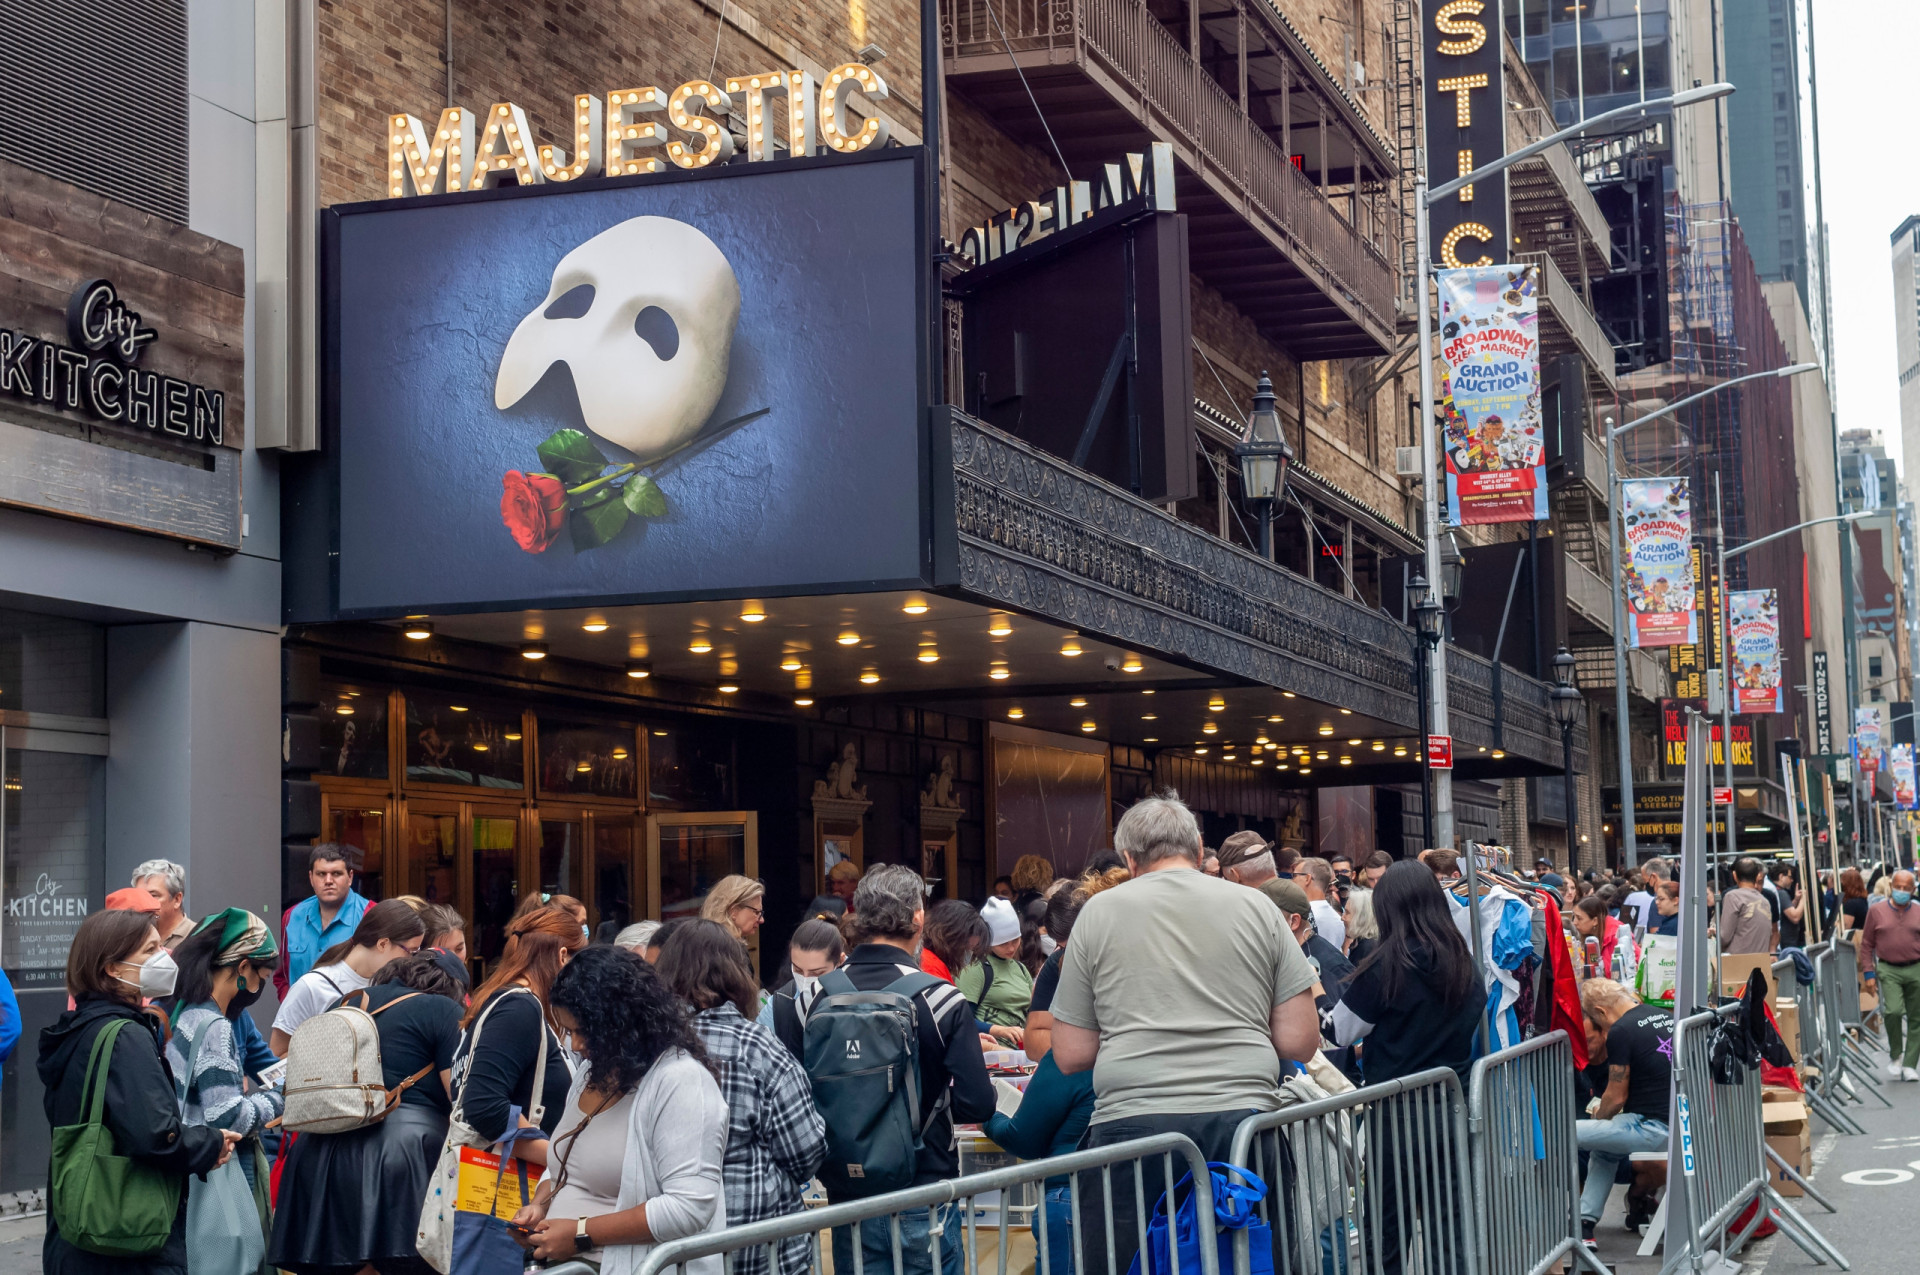 <p>After a historic 35-year run, this beloved Broadway show took its final bow in 2023, marking the end of an era in theater.</p><p><a href="https://www.msn.com/en-us/community/channel/vid-7xx8mnucu55yw63we9va2gwr7uihbxwc68fxqp25x6tg4ftibpra?cvid=94631541bc0f4f89bfd59158d696ad7e">Follow us and access great exclusive content every day</a></p>